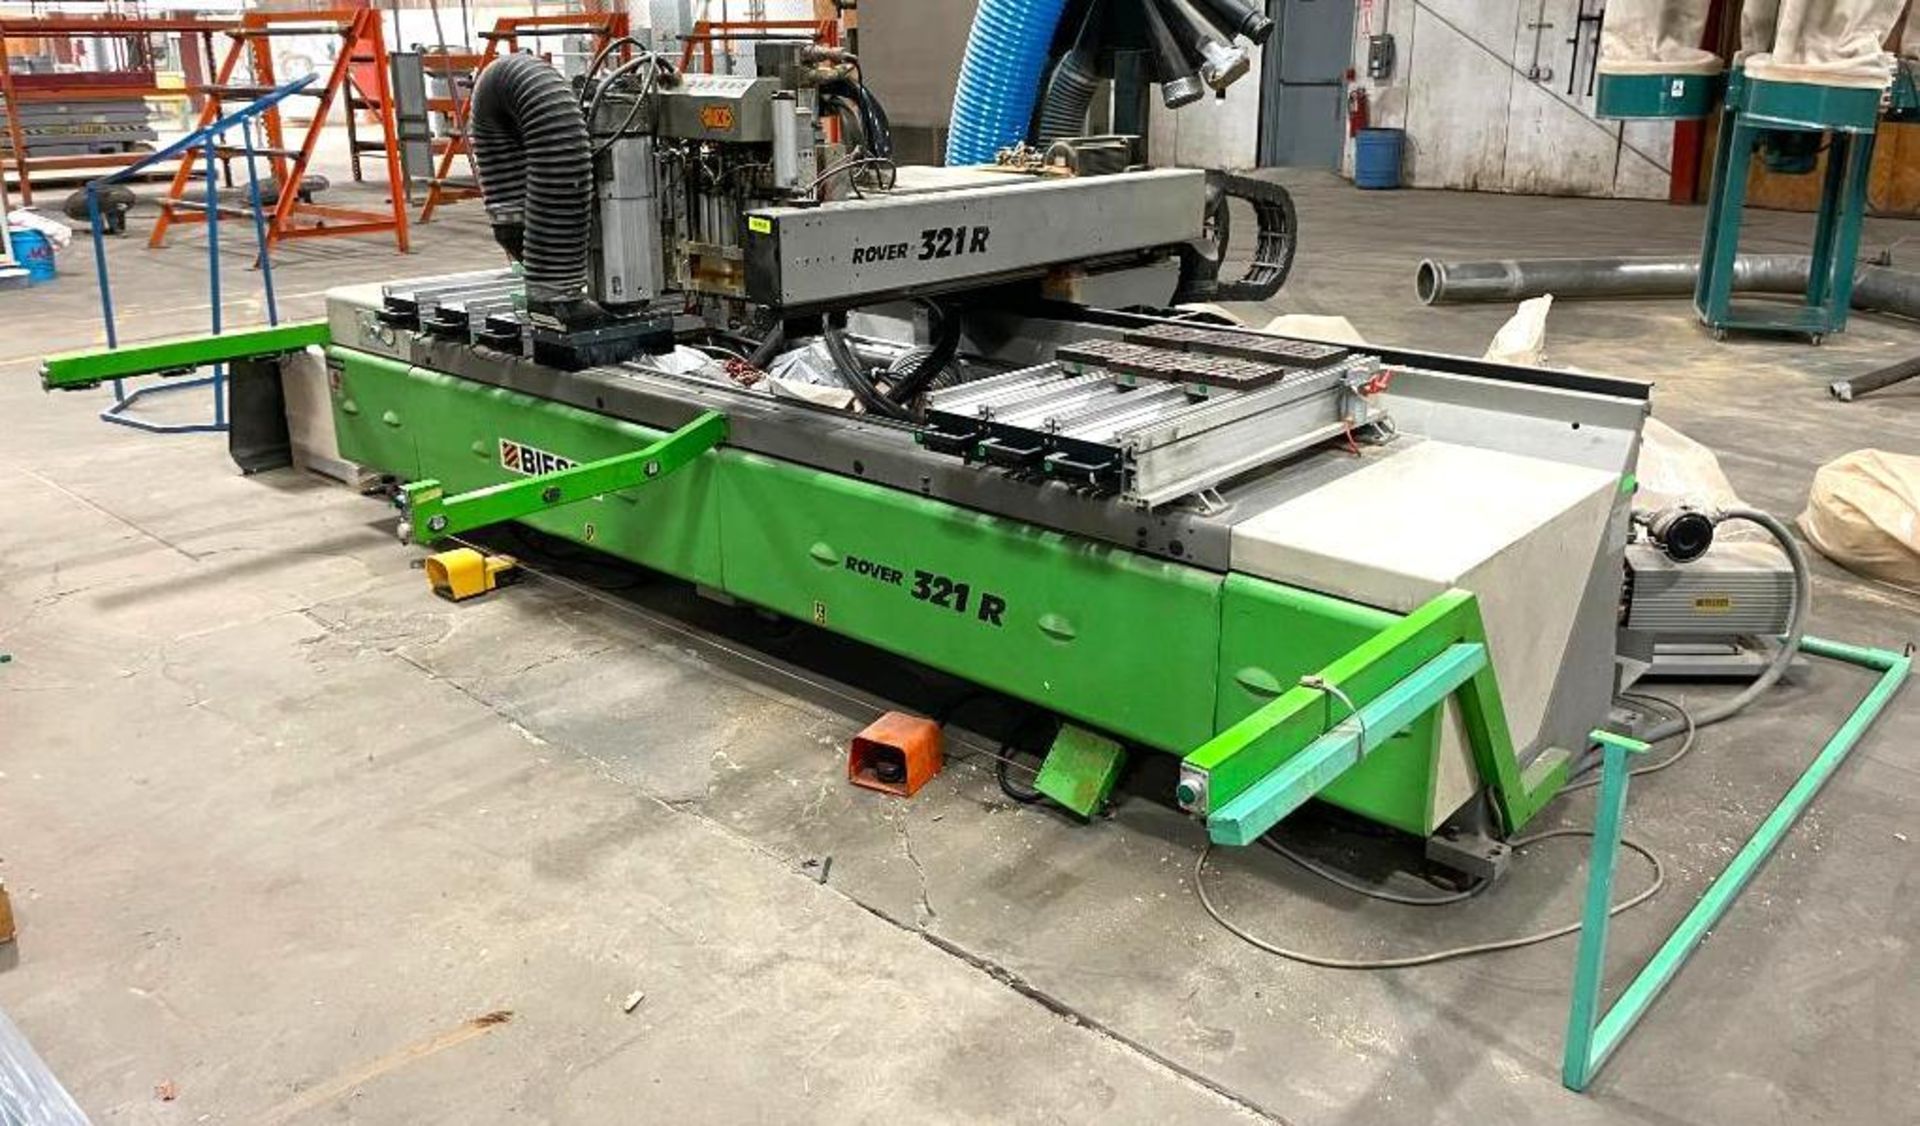 DESCRIPTION: CNC POINT TO POINT MACHINING CENTER BRAND/MODEL: BIESSE ROVER 321 R INFORMATION: COMES